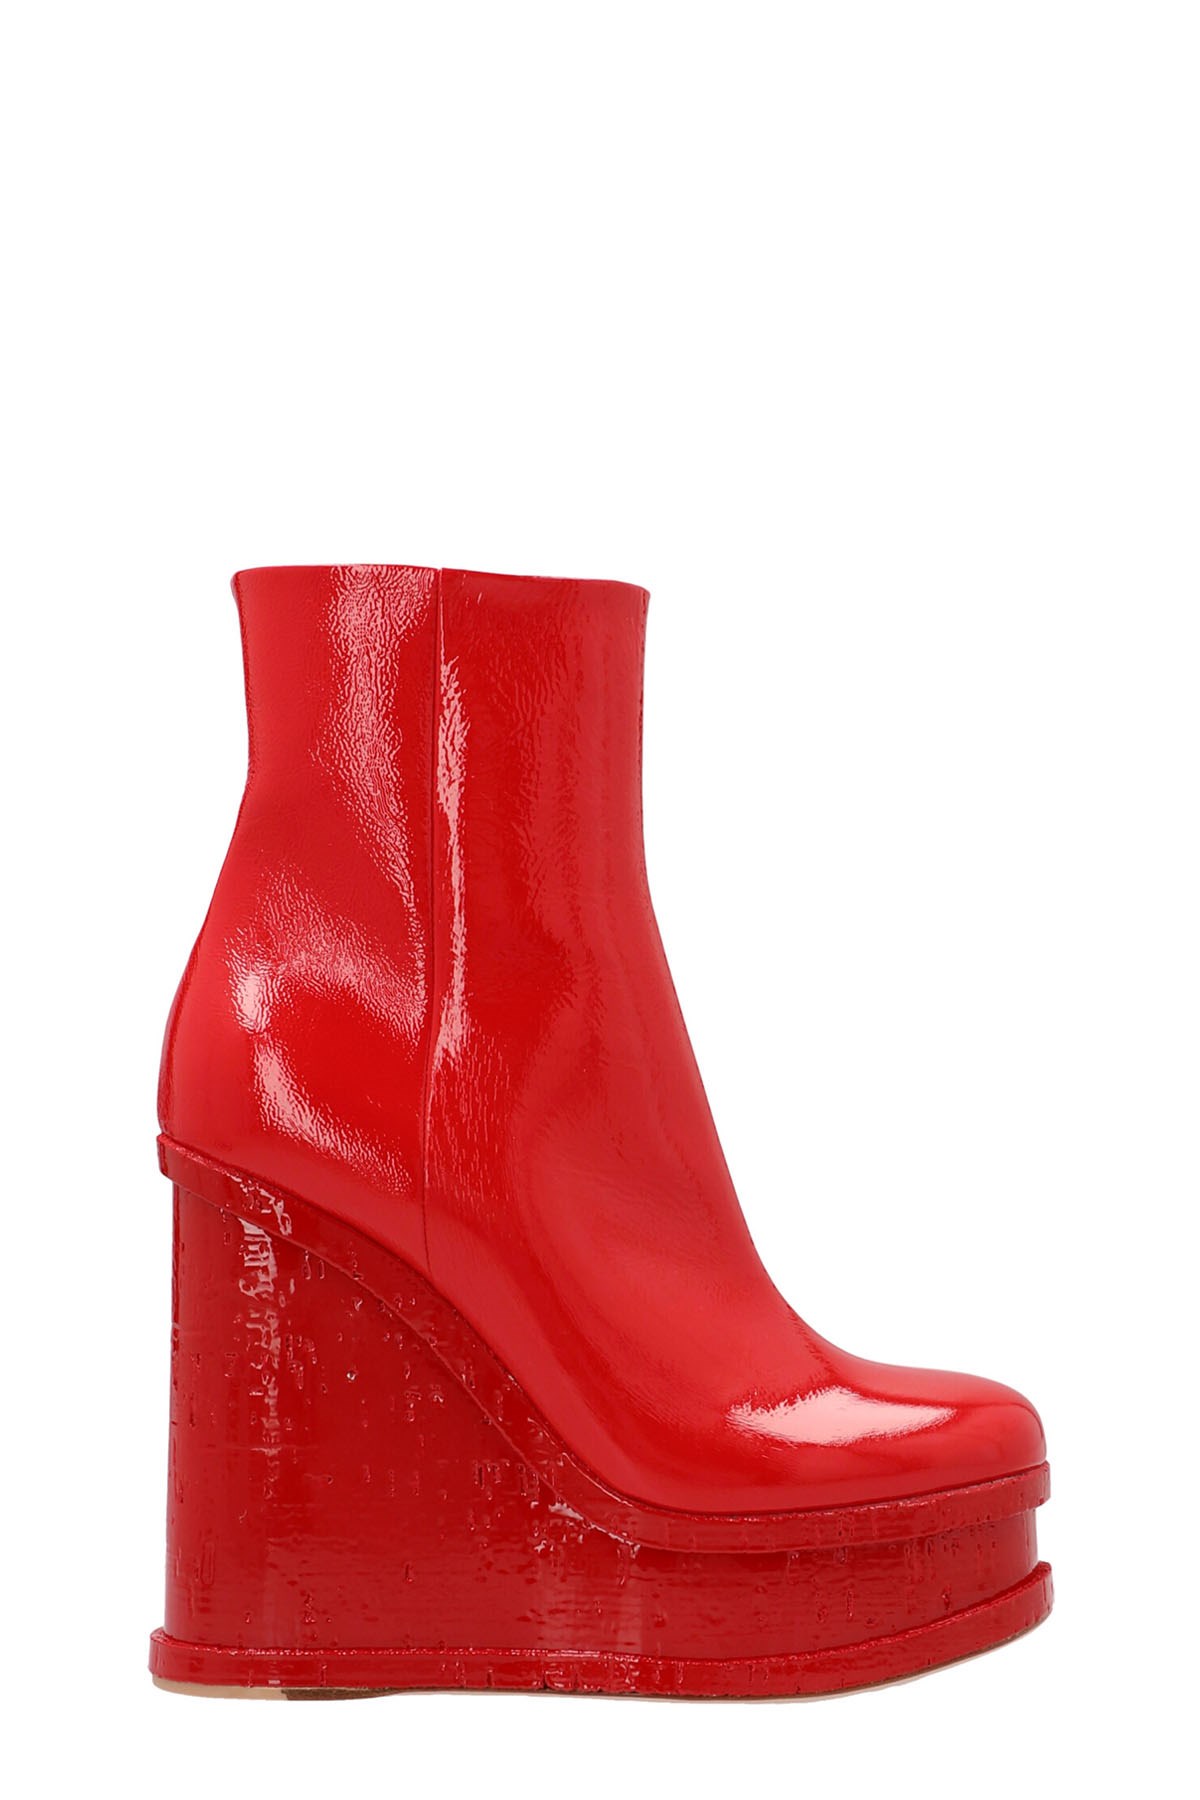 HAUS OF HONEY 'Laquer Doll' Ankle Boots